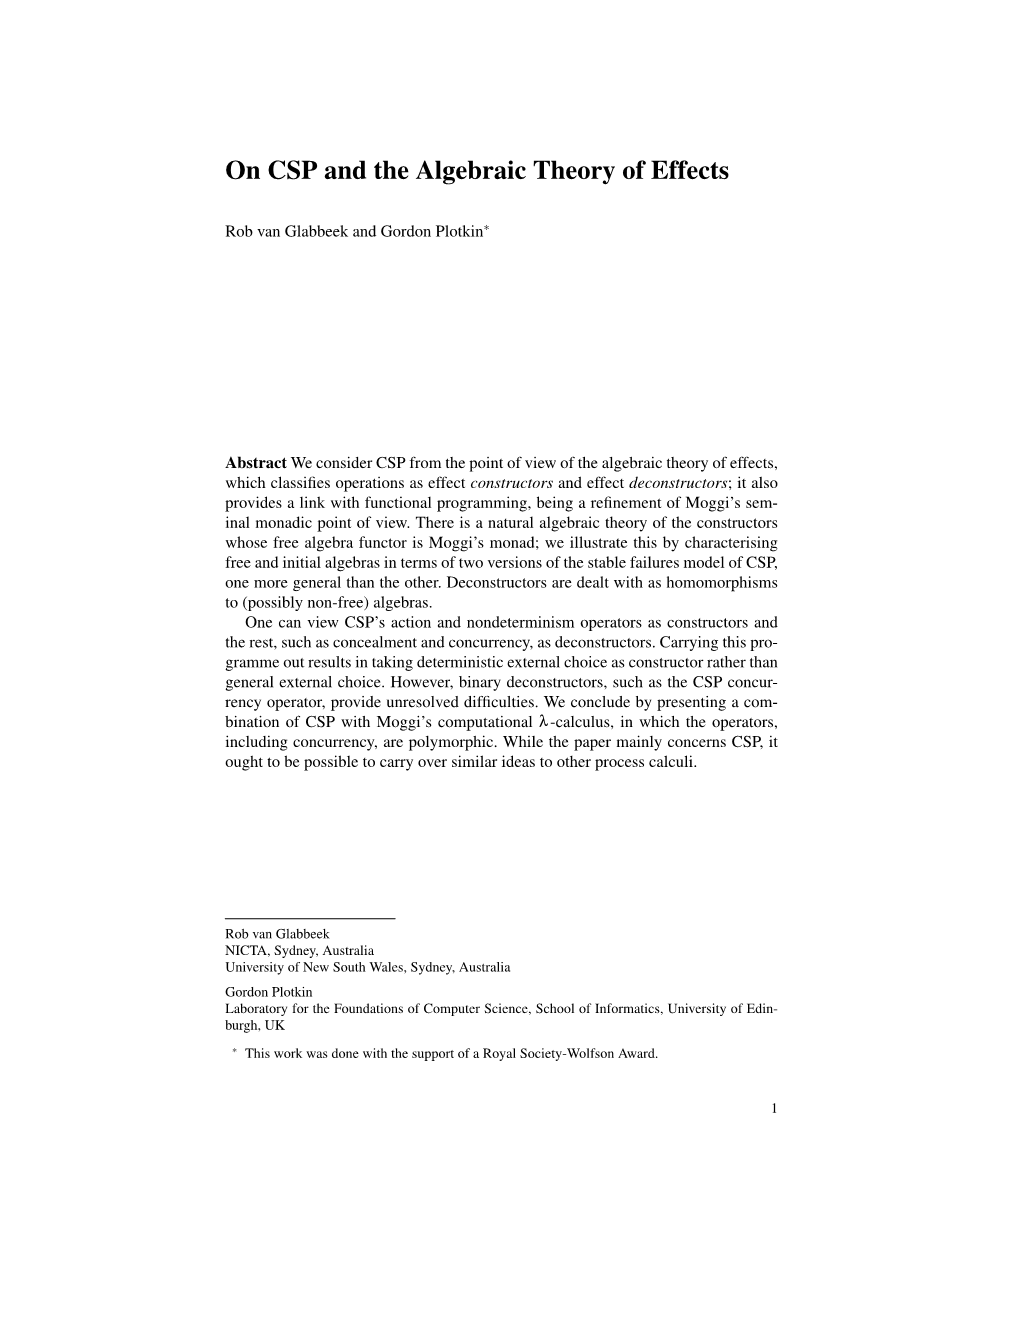 On CSP and the Algebraic Theory of Effects